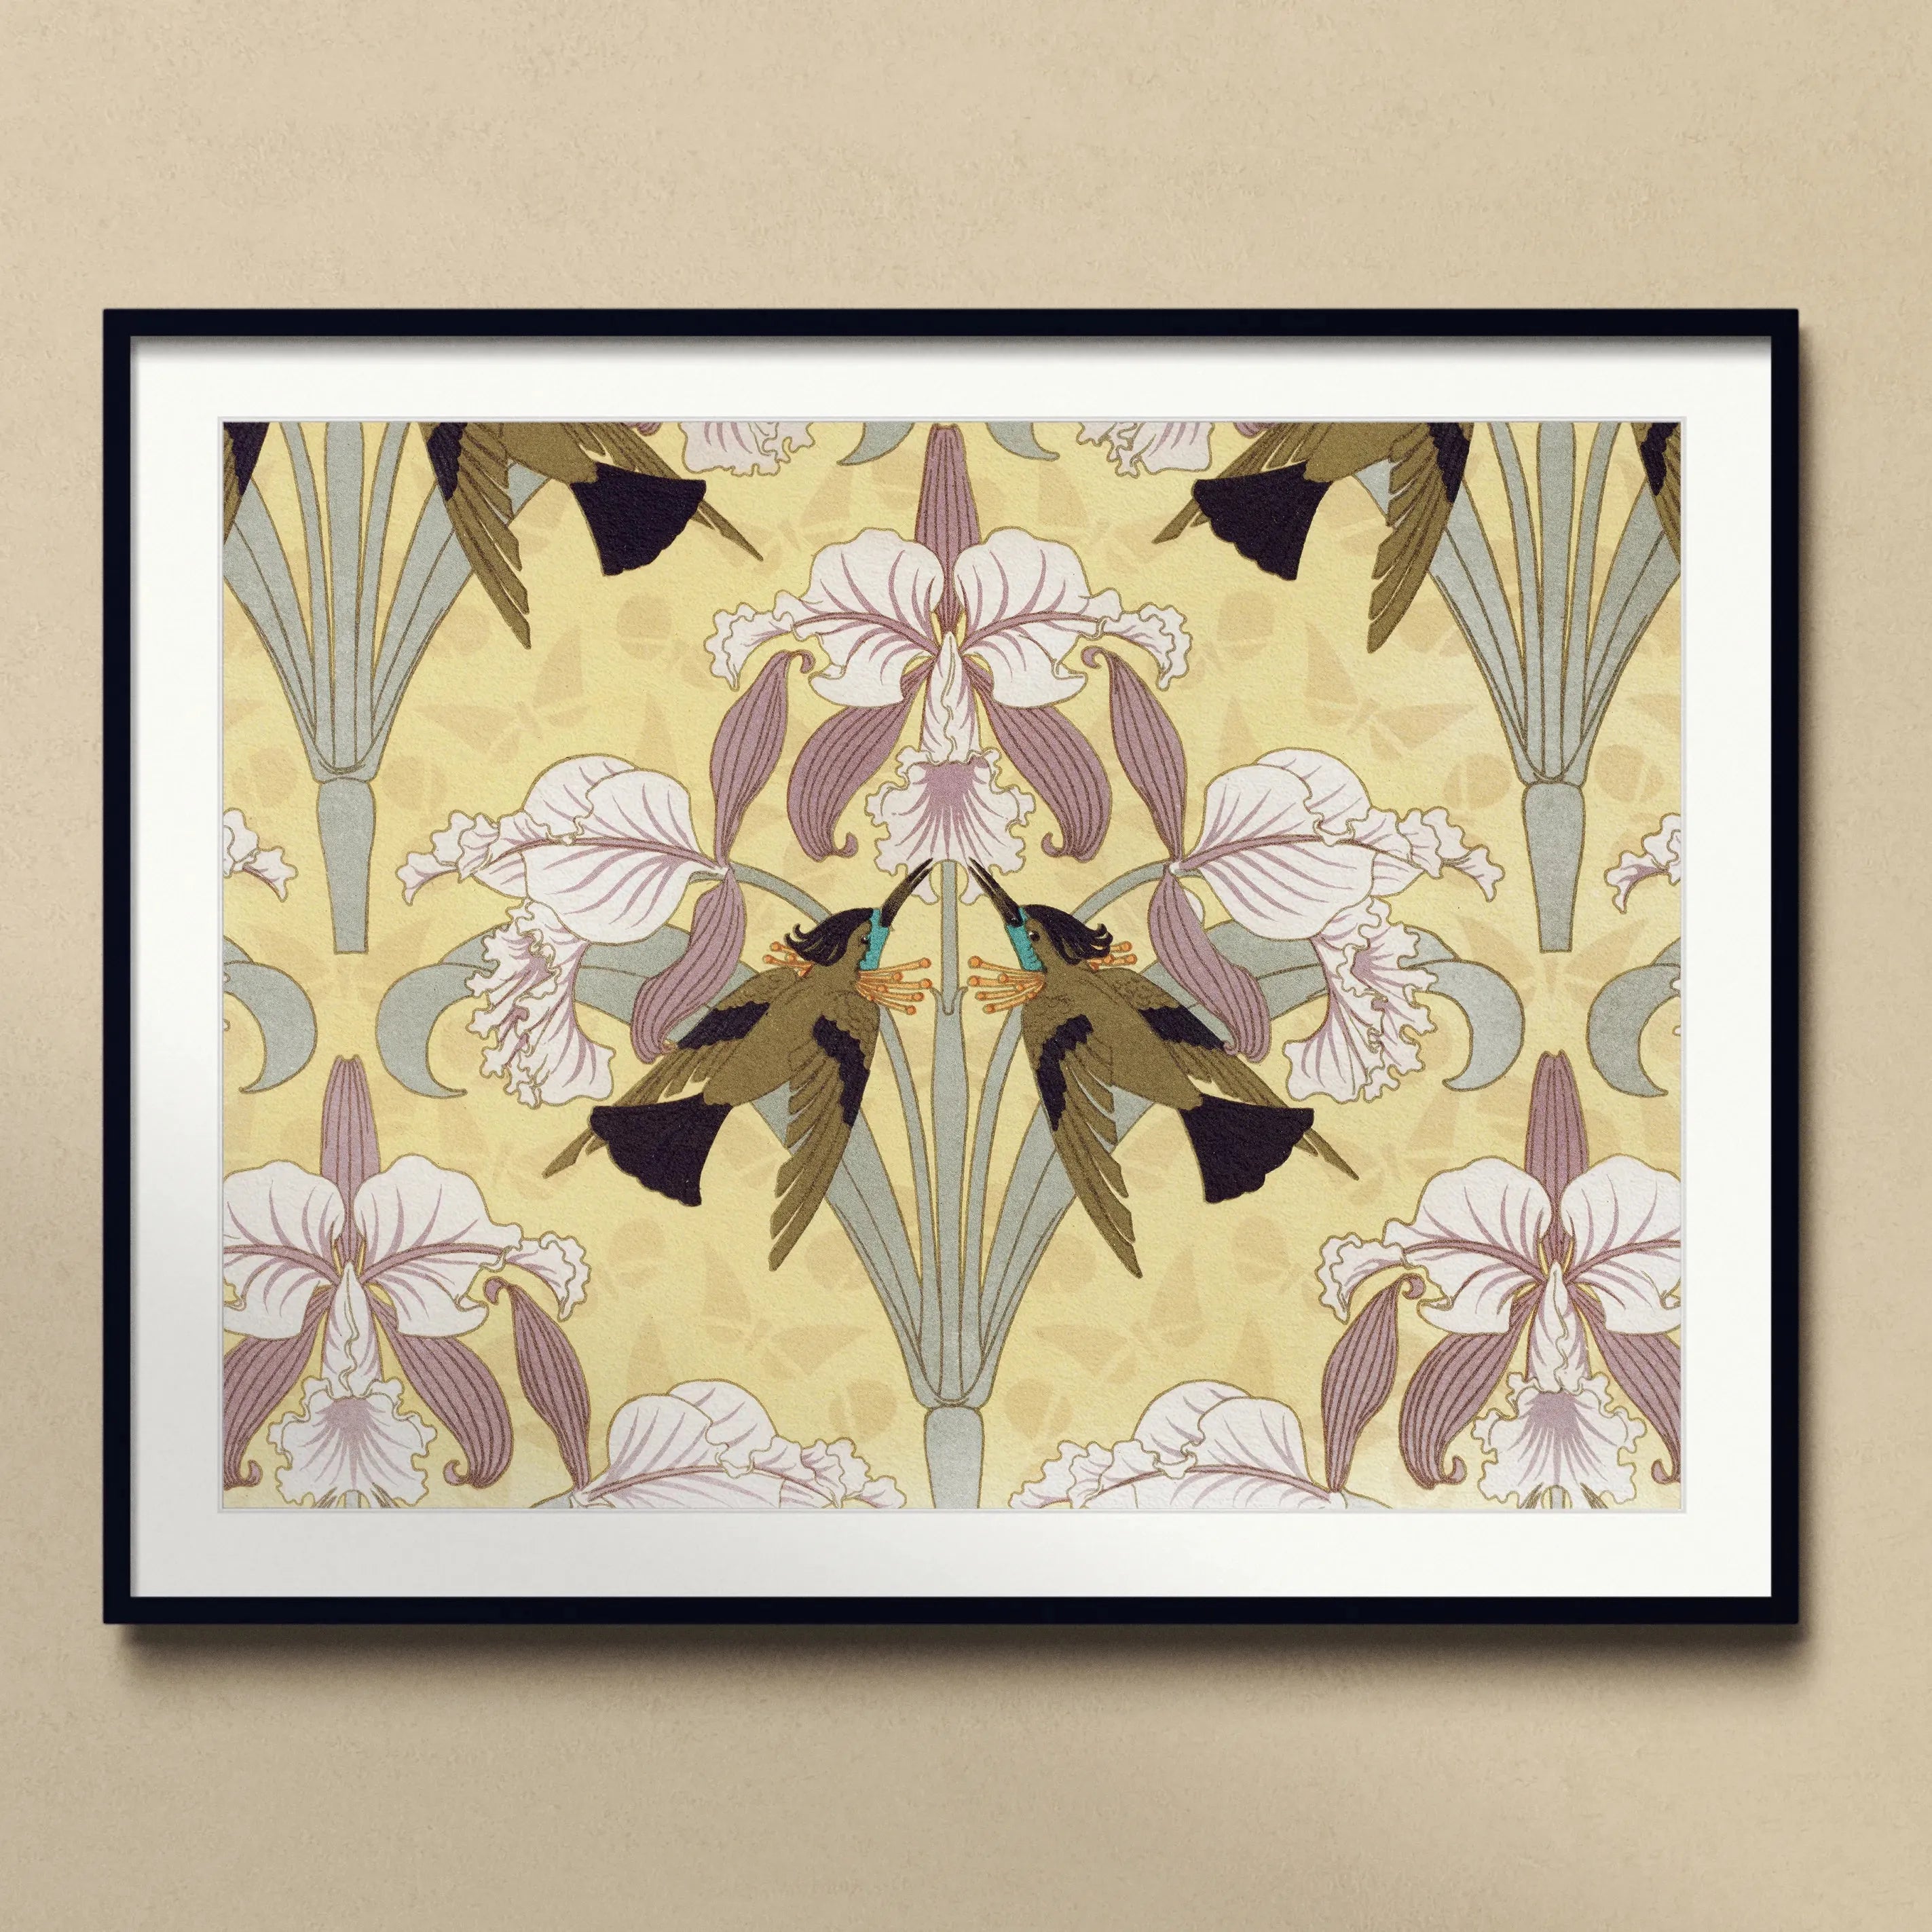 Oiseaux-mouches Et Orchidées - Maurice Pillard Verneuil Framed & Mounted Print - Posters Prints & Visual Artwork